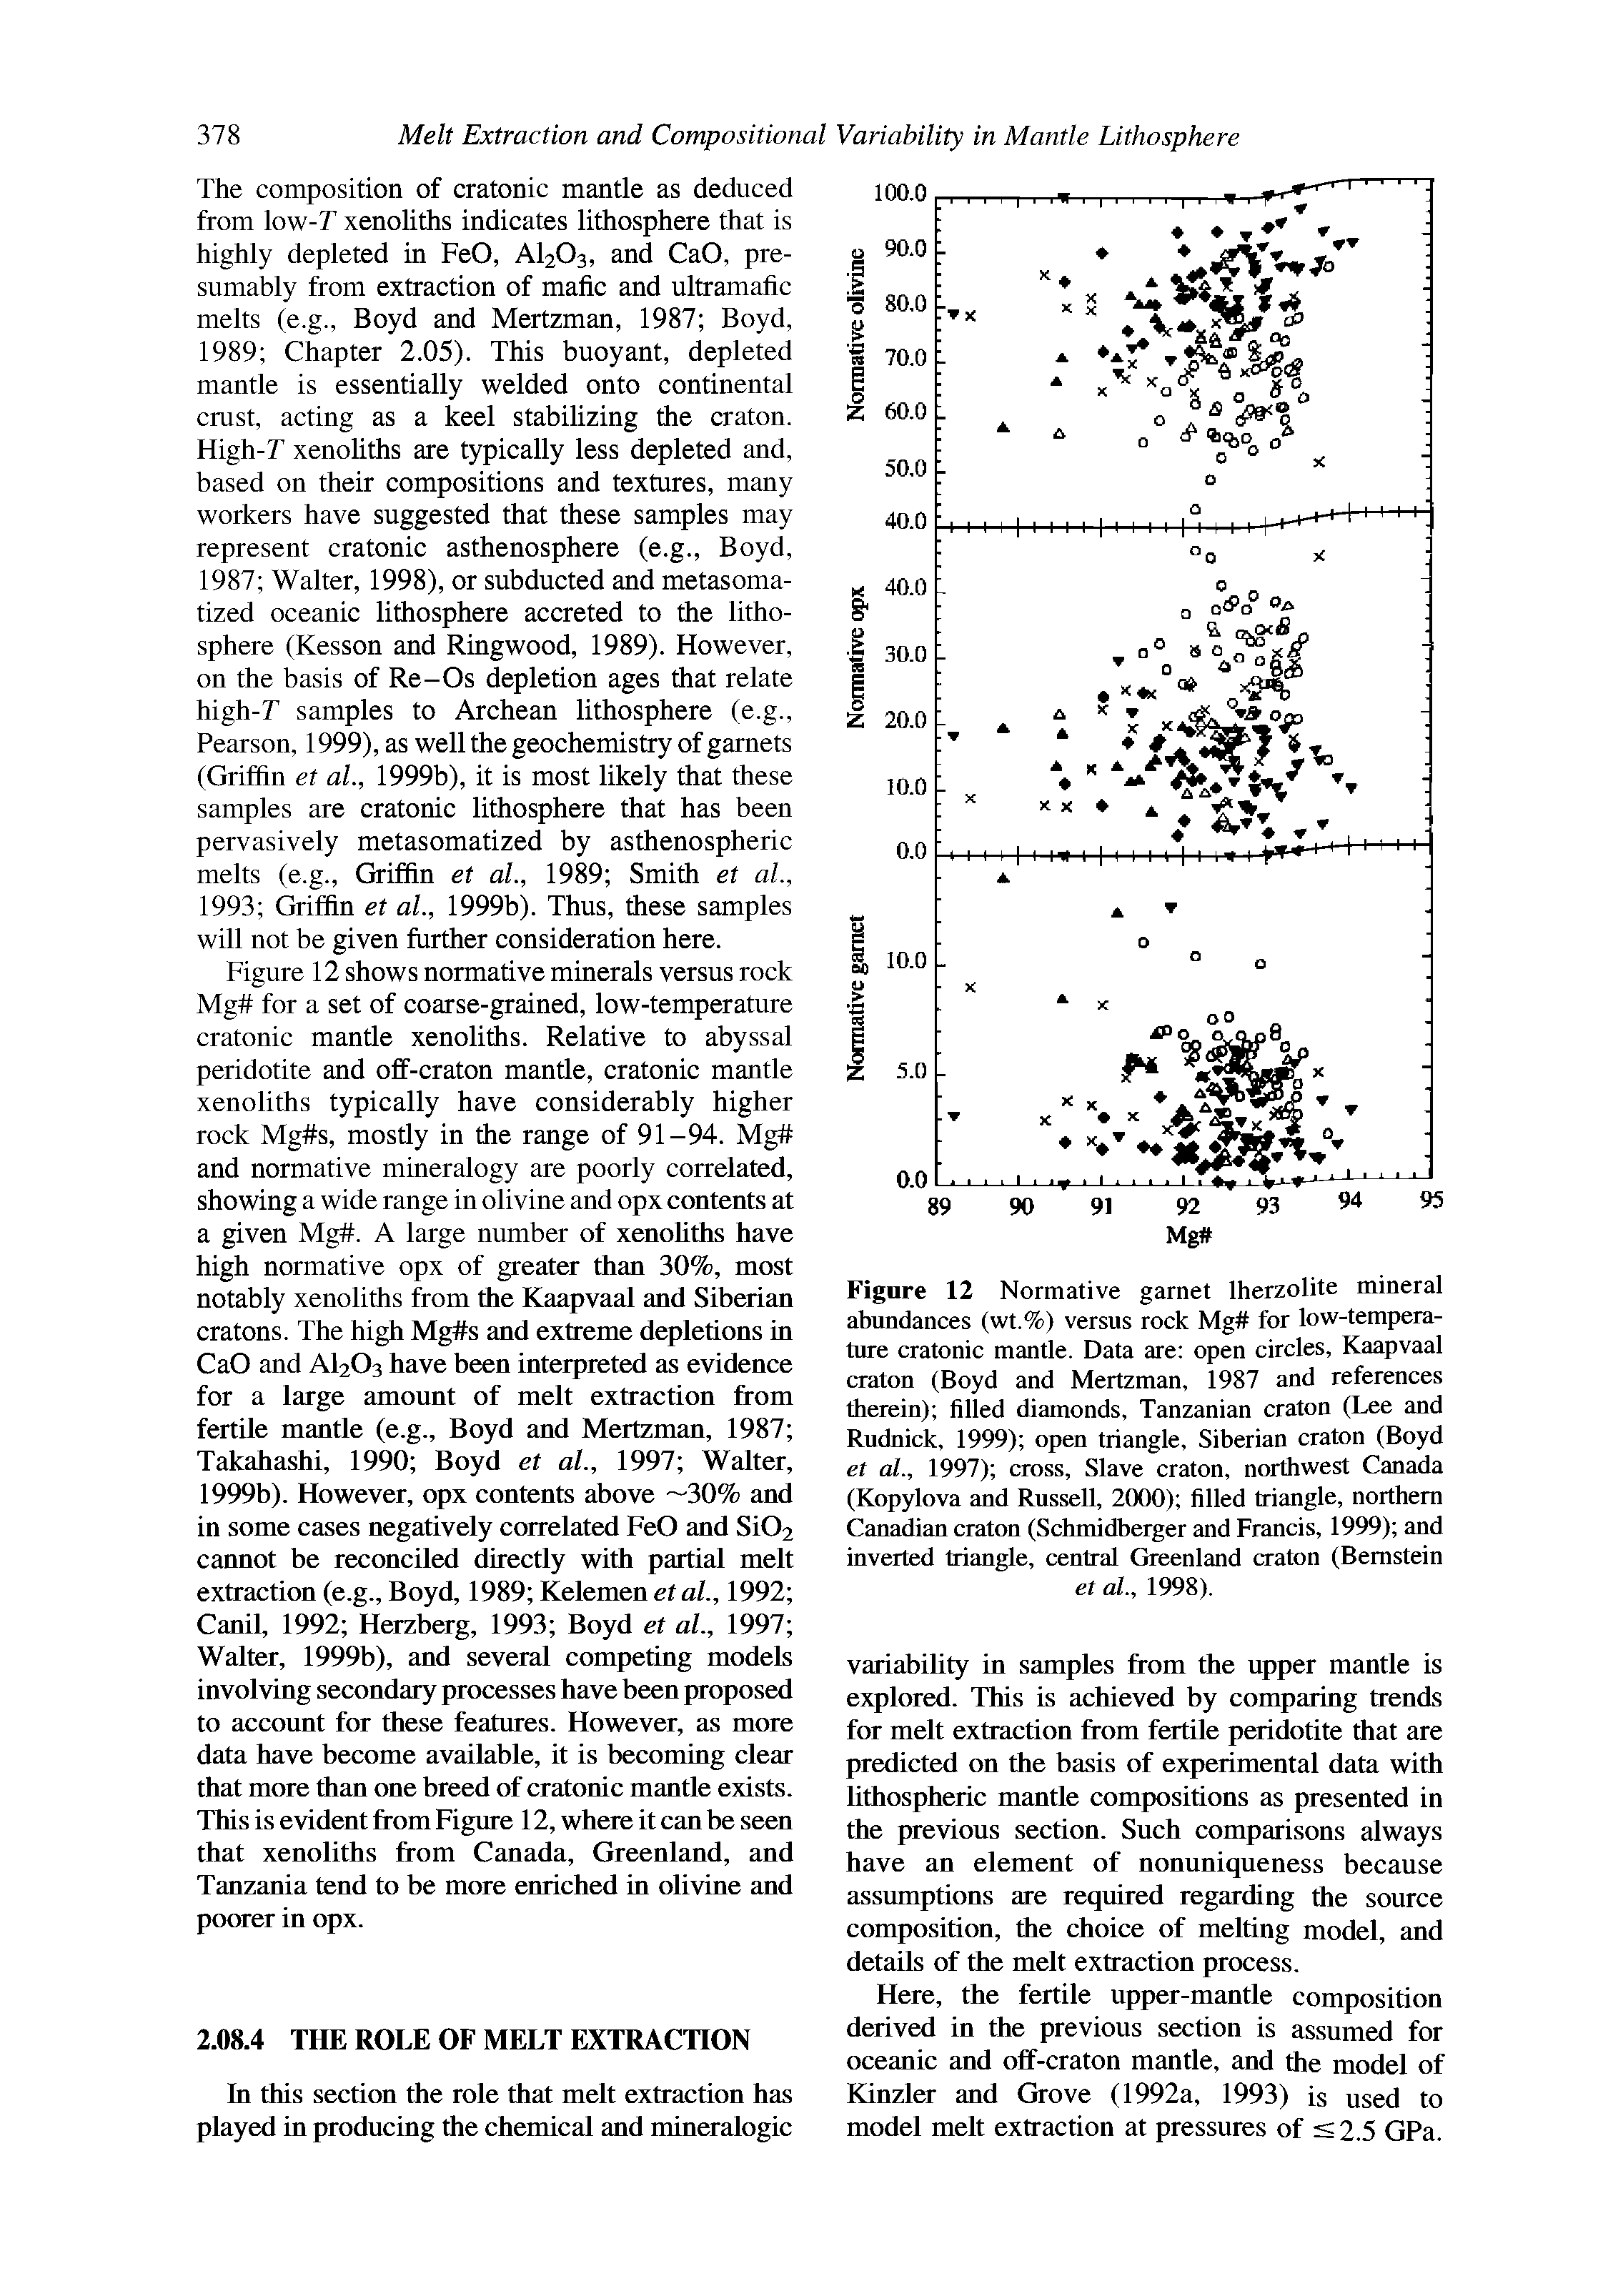 Figure 12 Normative garnet Iherzolite mineral abundances (wt.%) versus rock Mg for low-temperature cratonic mantle. Data are open circles, Kaapvaal craton (Boyd and Mertzman, 1987 and references therein) filled diamonds, Tanzanian craton (Lee and Rudnick, 1999) open triangle, Siberian craton (Boyd et al., 1997) cross. Slave craton, northwest Canada (Kopylova and Russell, 2000) filled triangle, northern Canadian craton (Schmidberger and Francis, 1999) and inverted triangle, central Greenland craton (Bernstein et al., 1998).